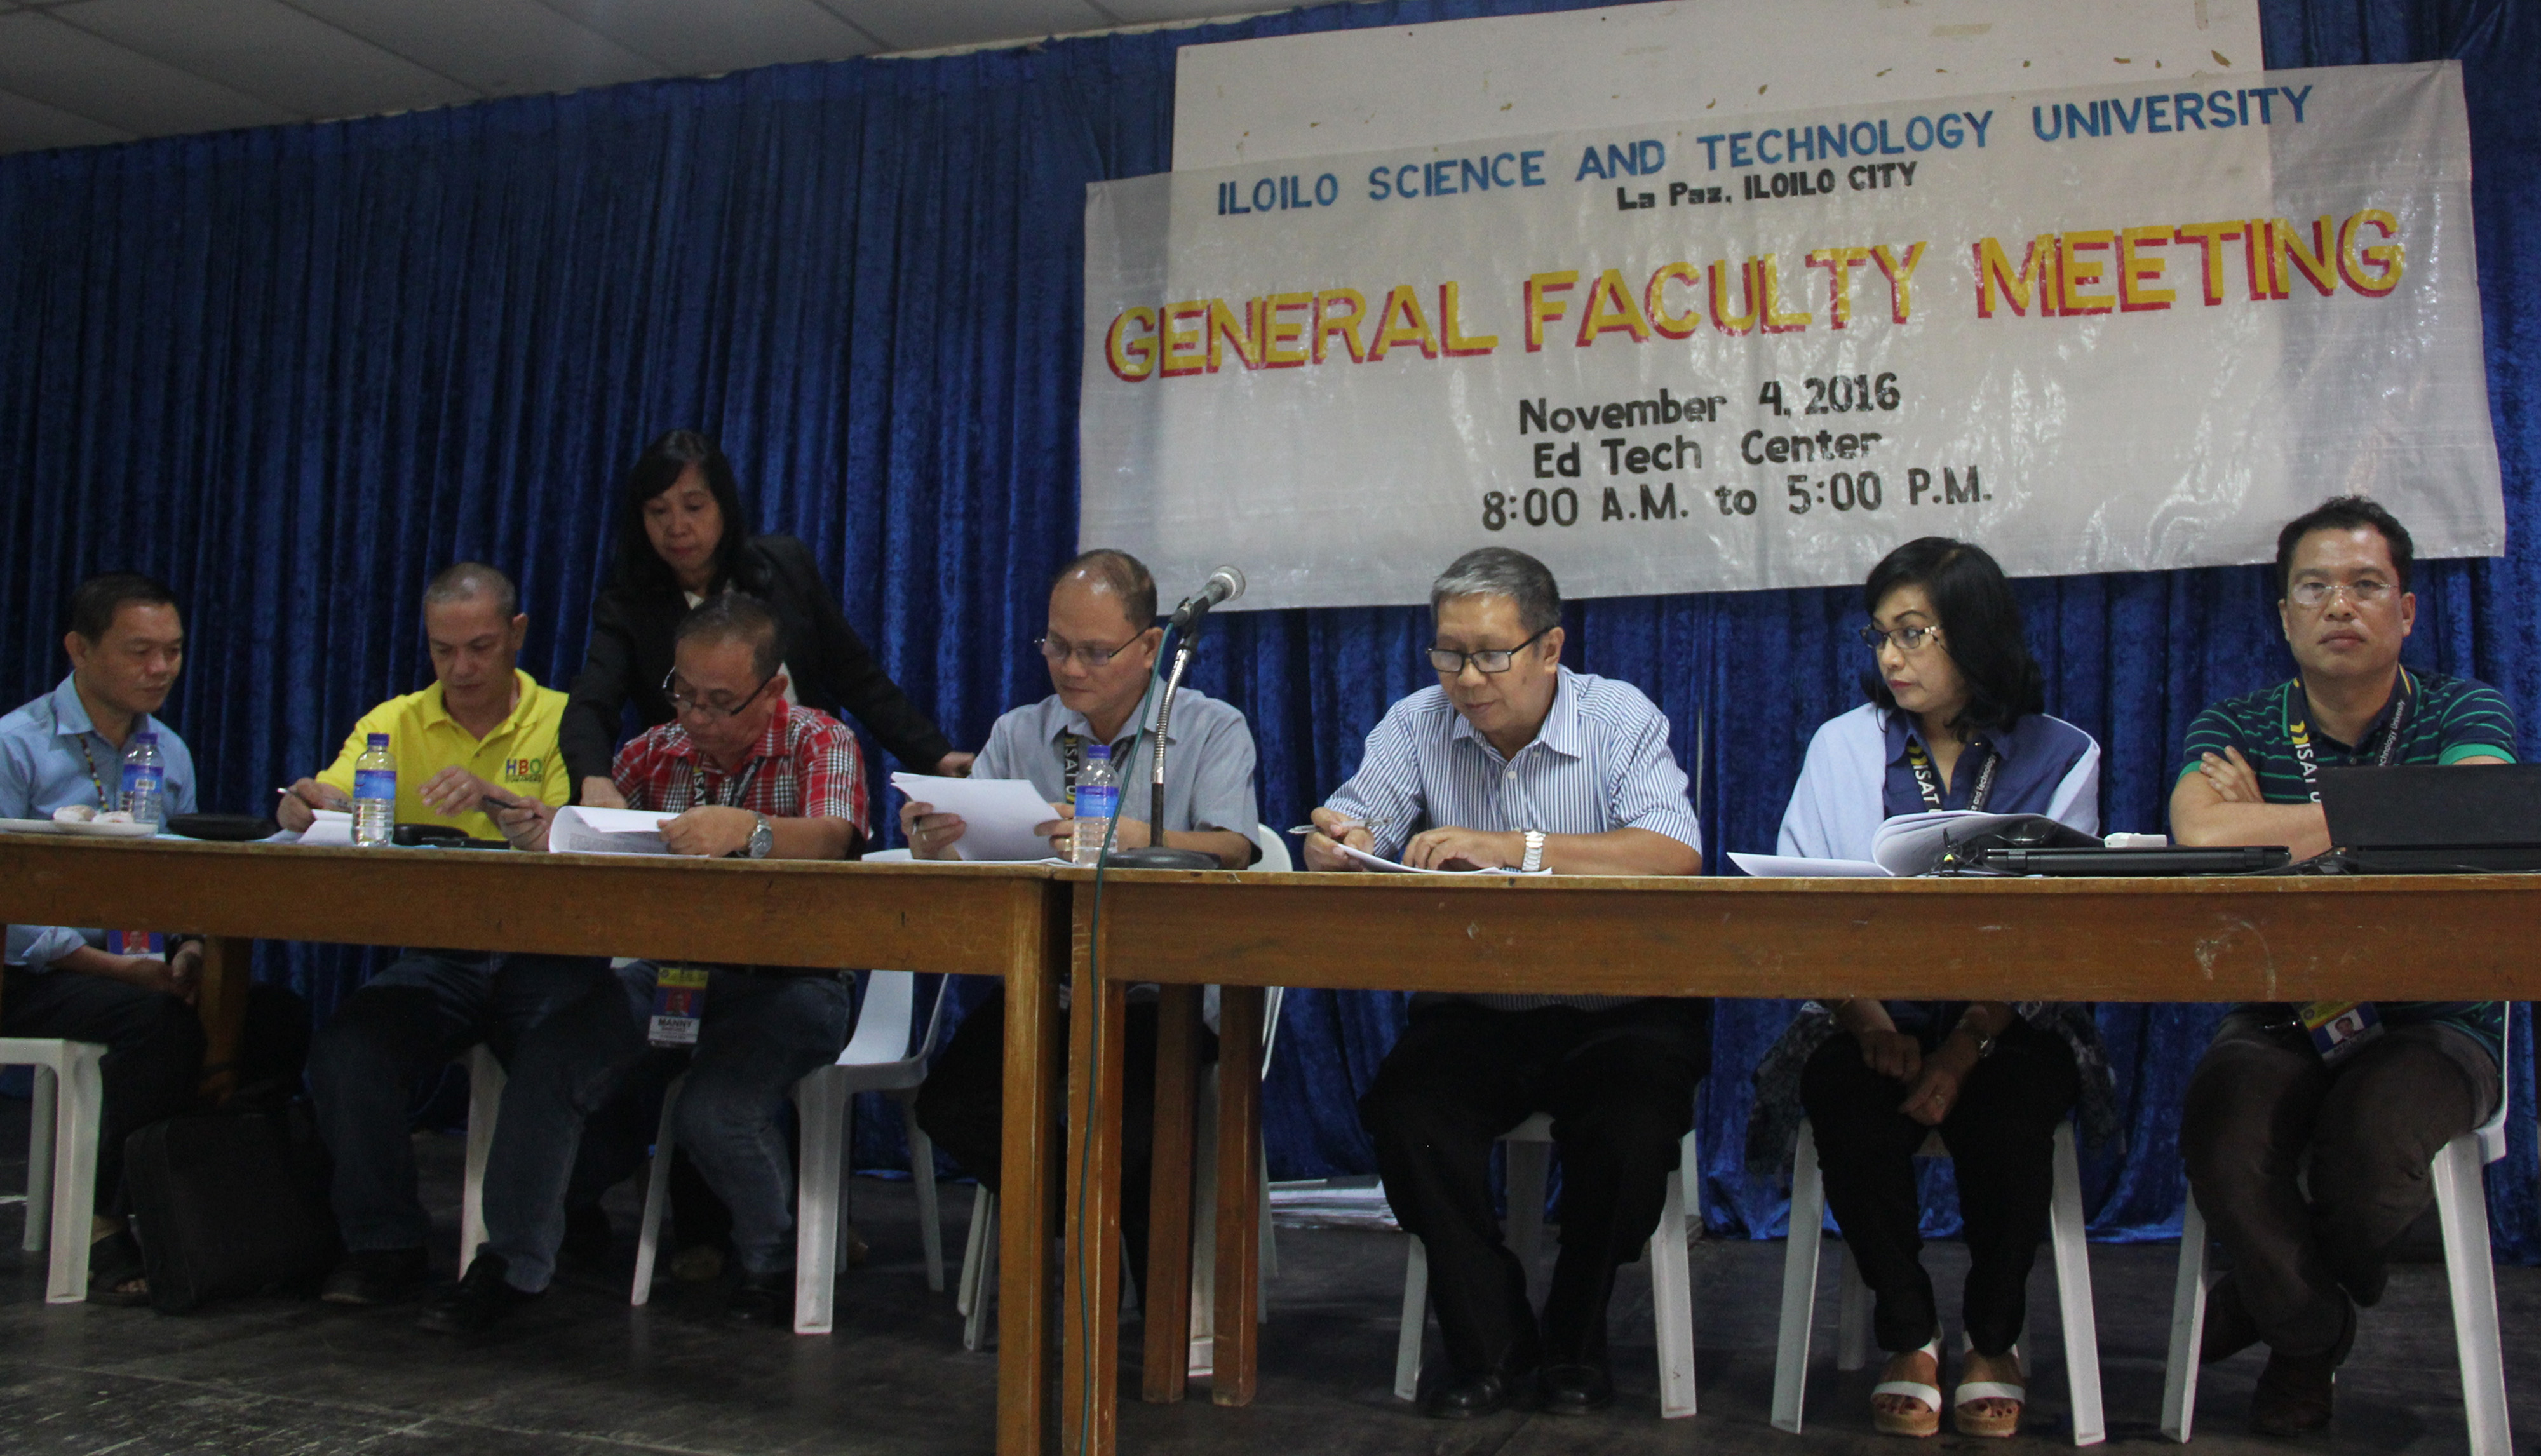 Top university officials witness the signing of the collective negotiable agreement (CNA).